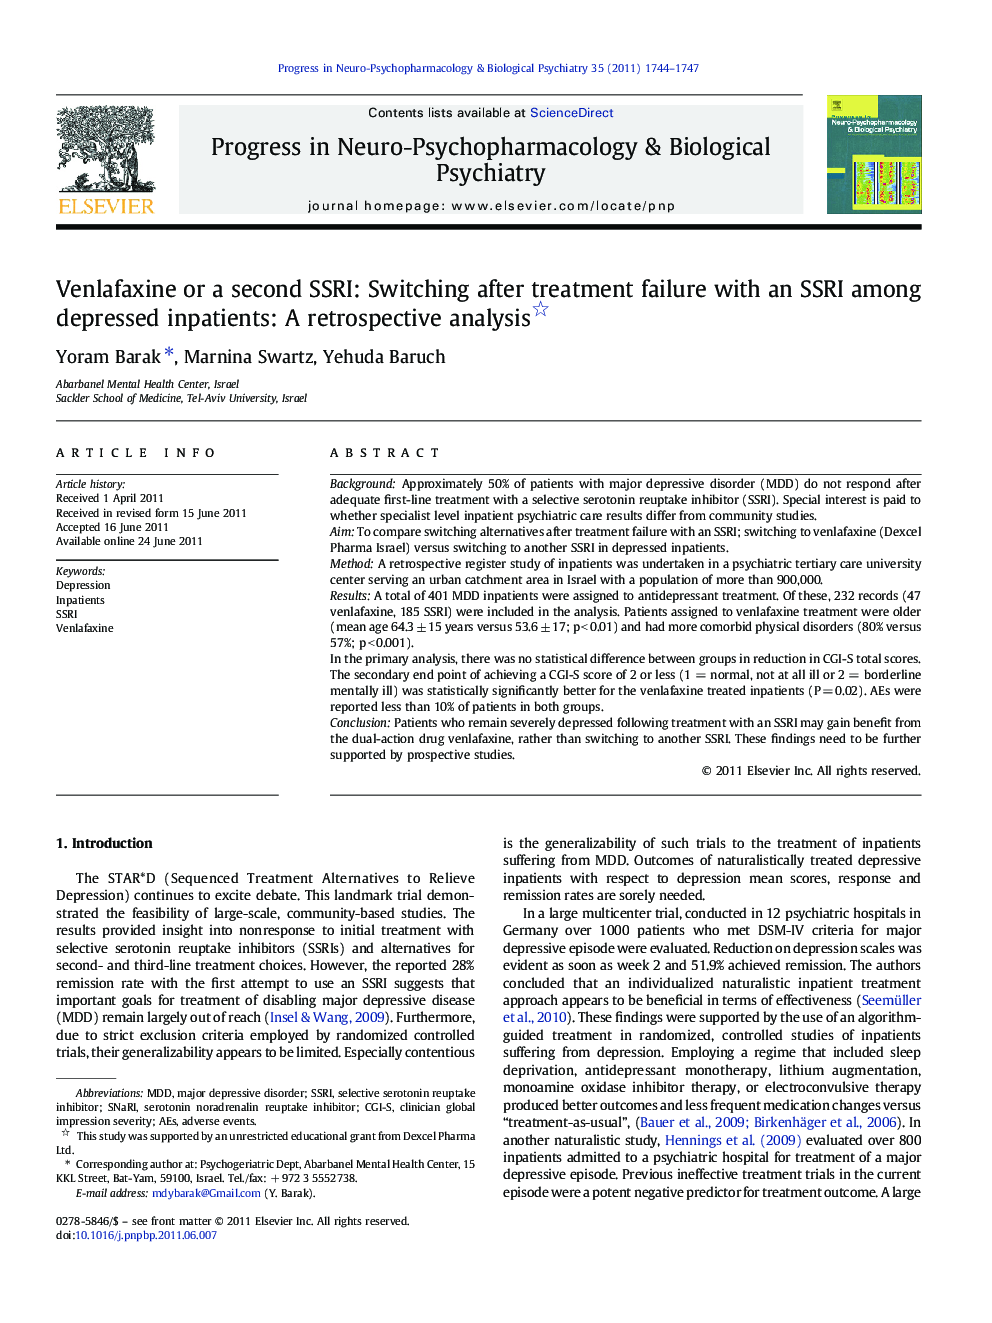 Venlafaxine or a second SSRI: Switching after treatment failure with an SSRI among depressed inpatients: A retrospective analysis